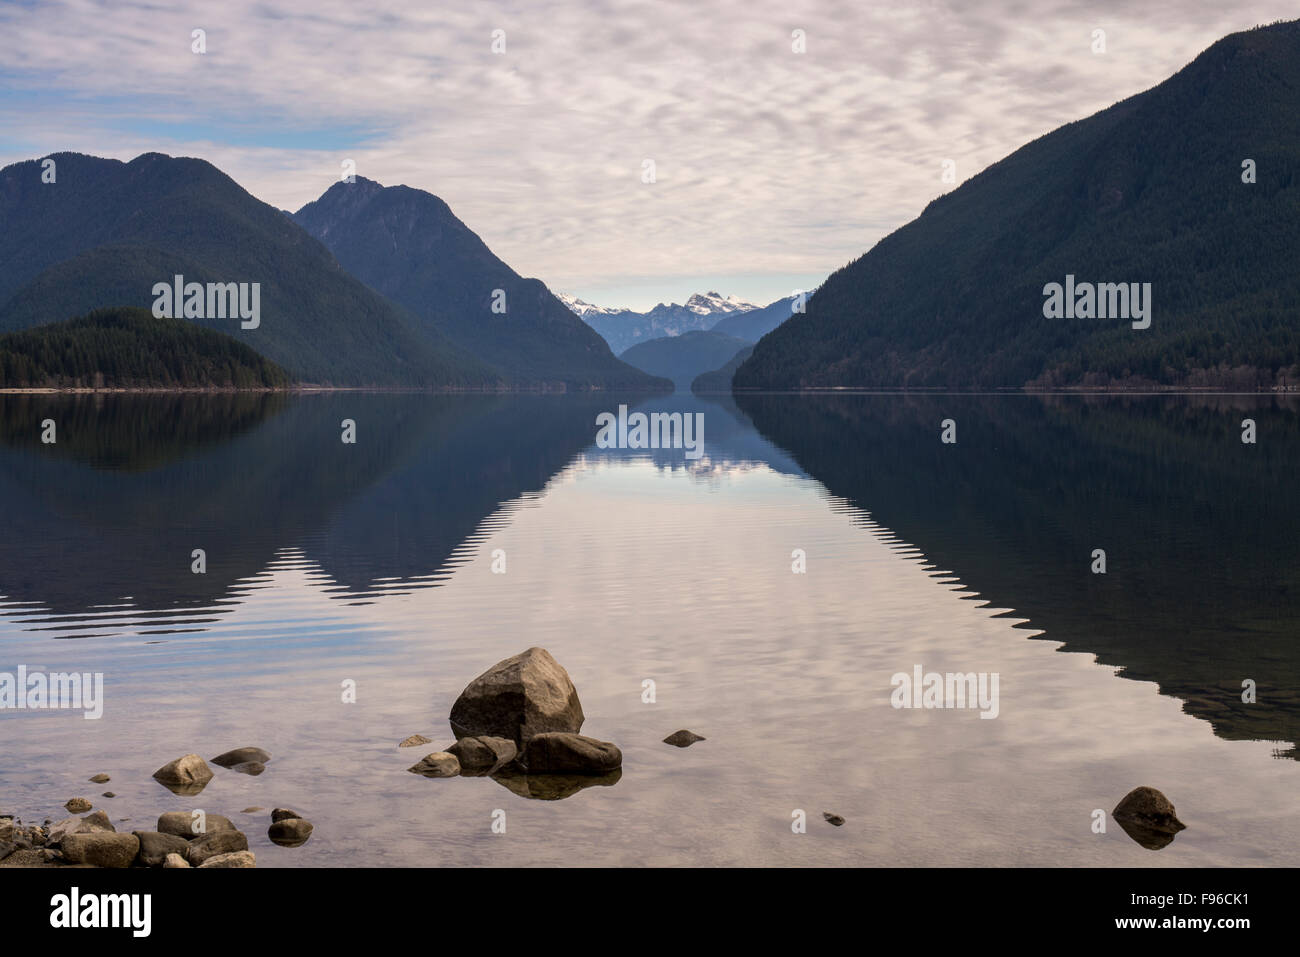 Mountain reflection on Alouette Lake in Golden Ears provincial park, Maple Ridge, British Columbia, Canada. Stock Photo